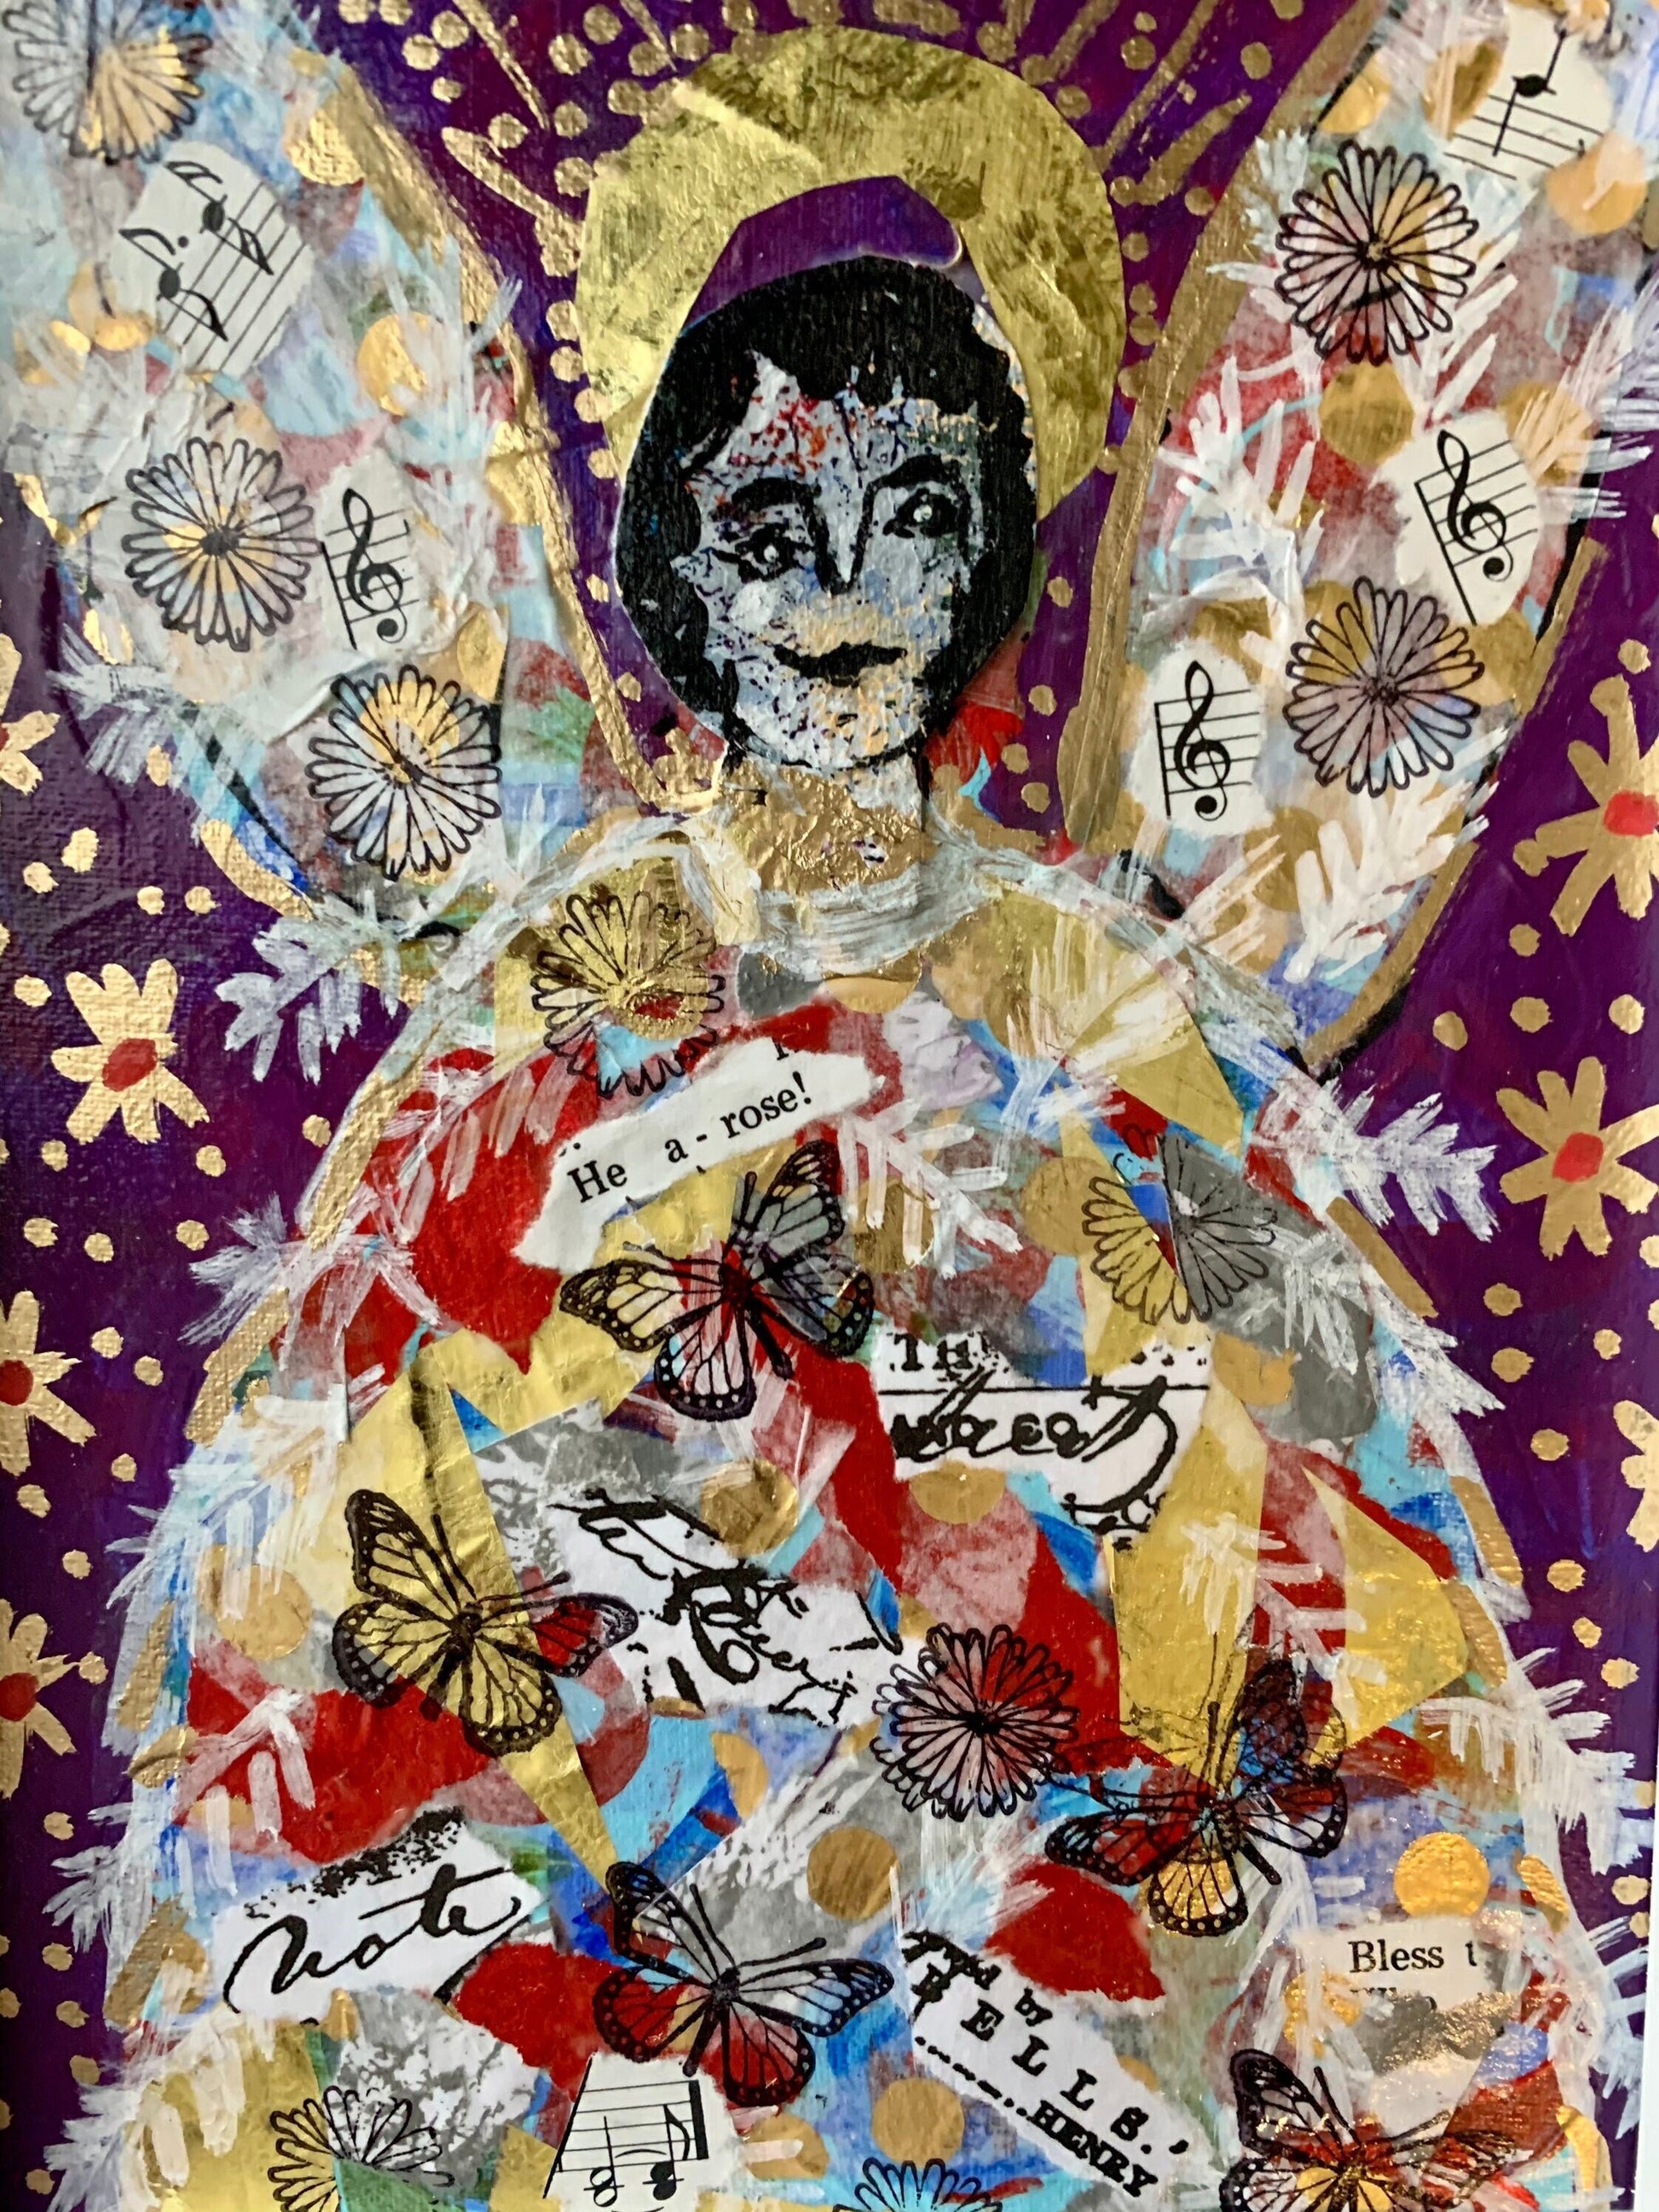 Angel of Glad Tidings Collage painting